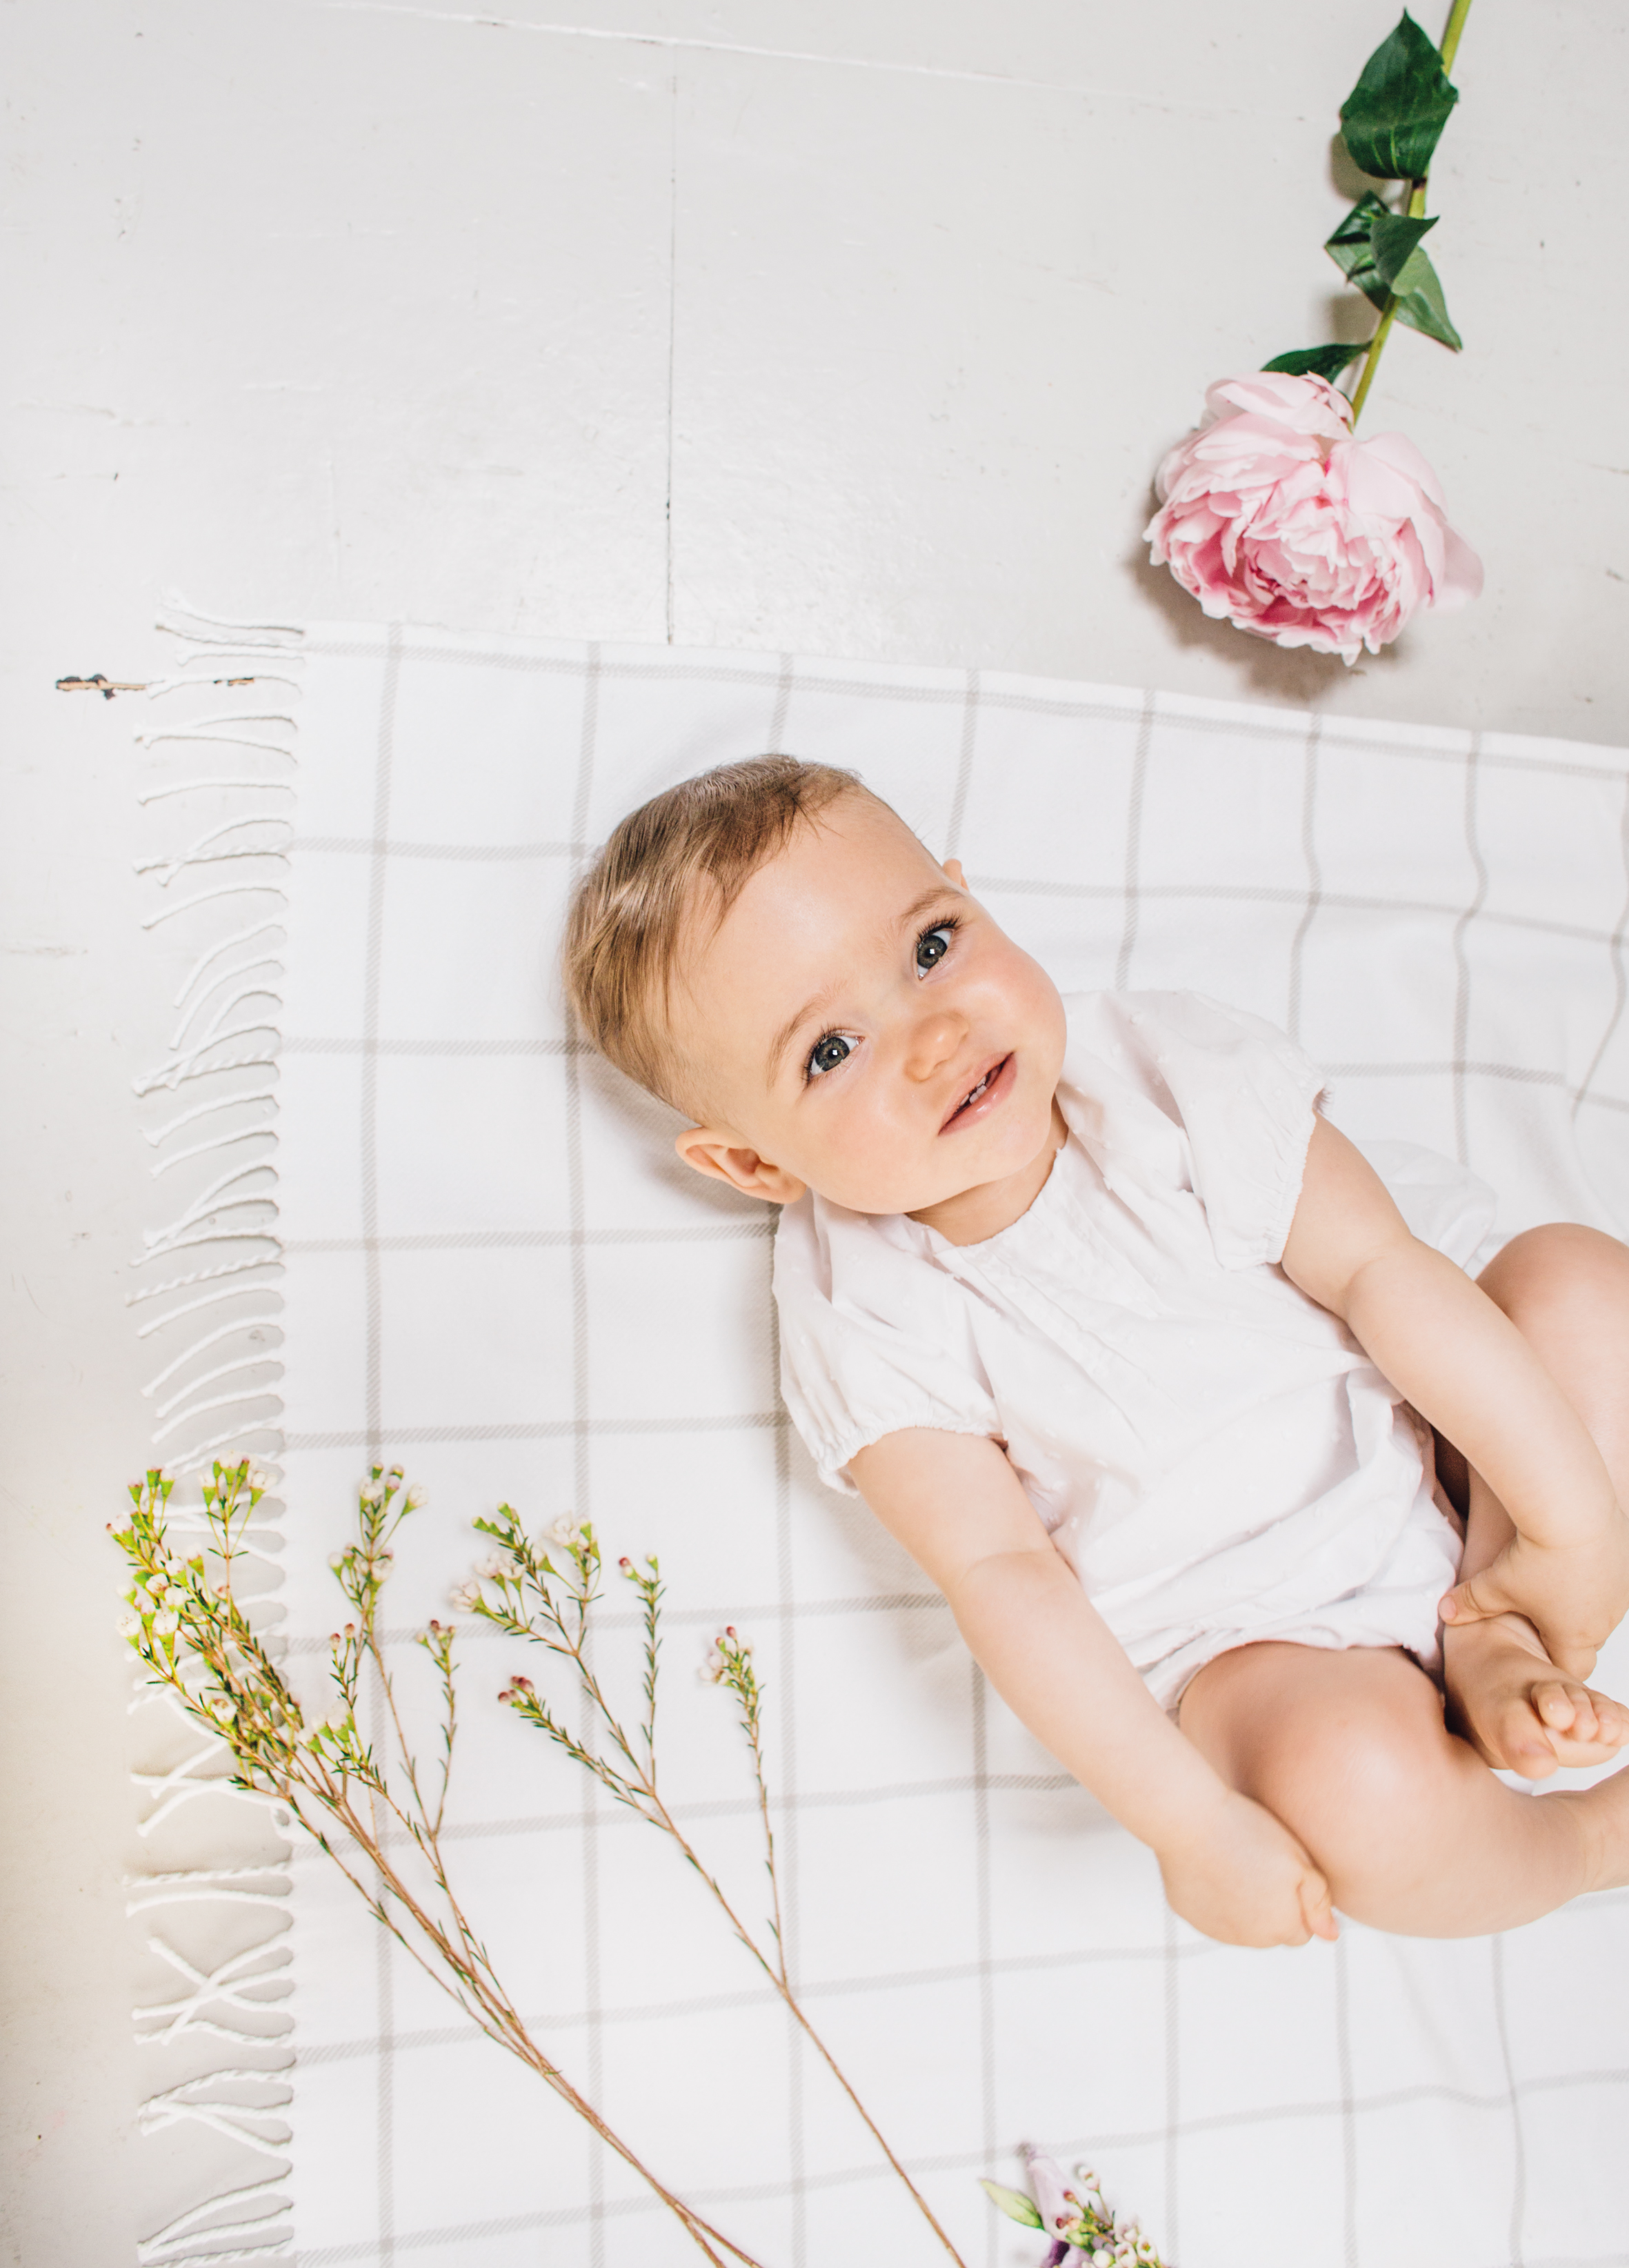 Summer whites, editorial for Baby London, July 2017